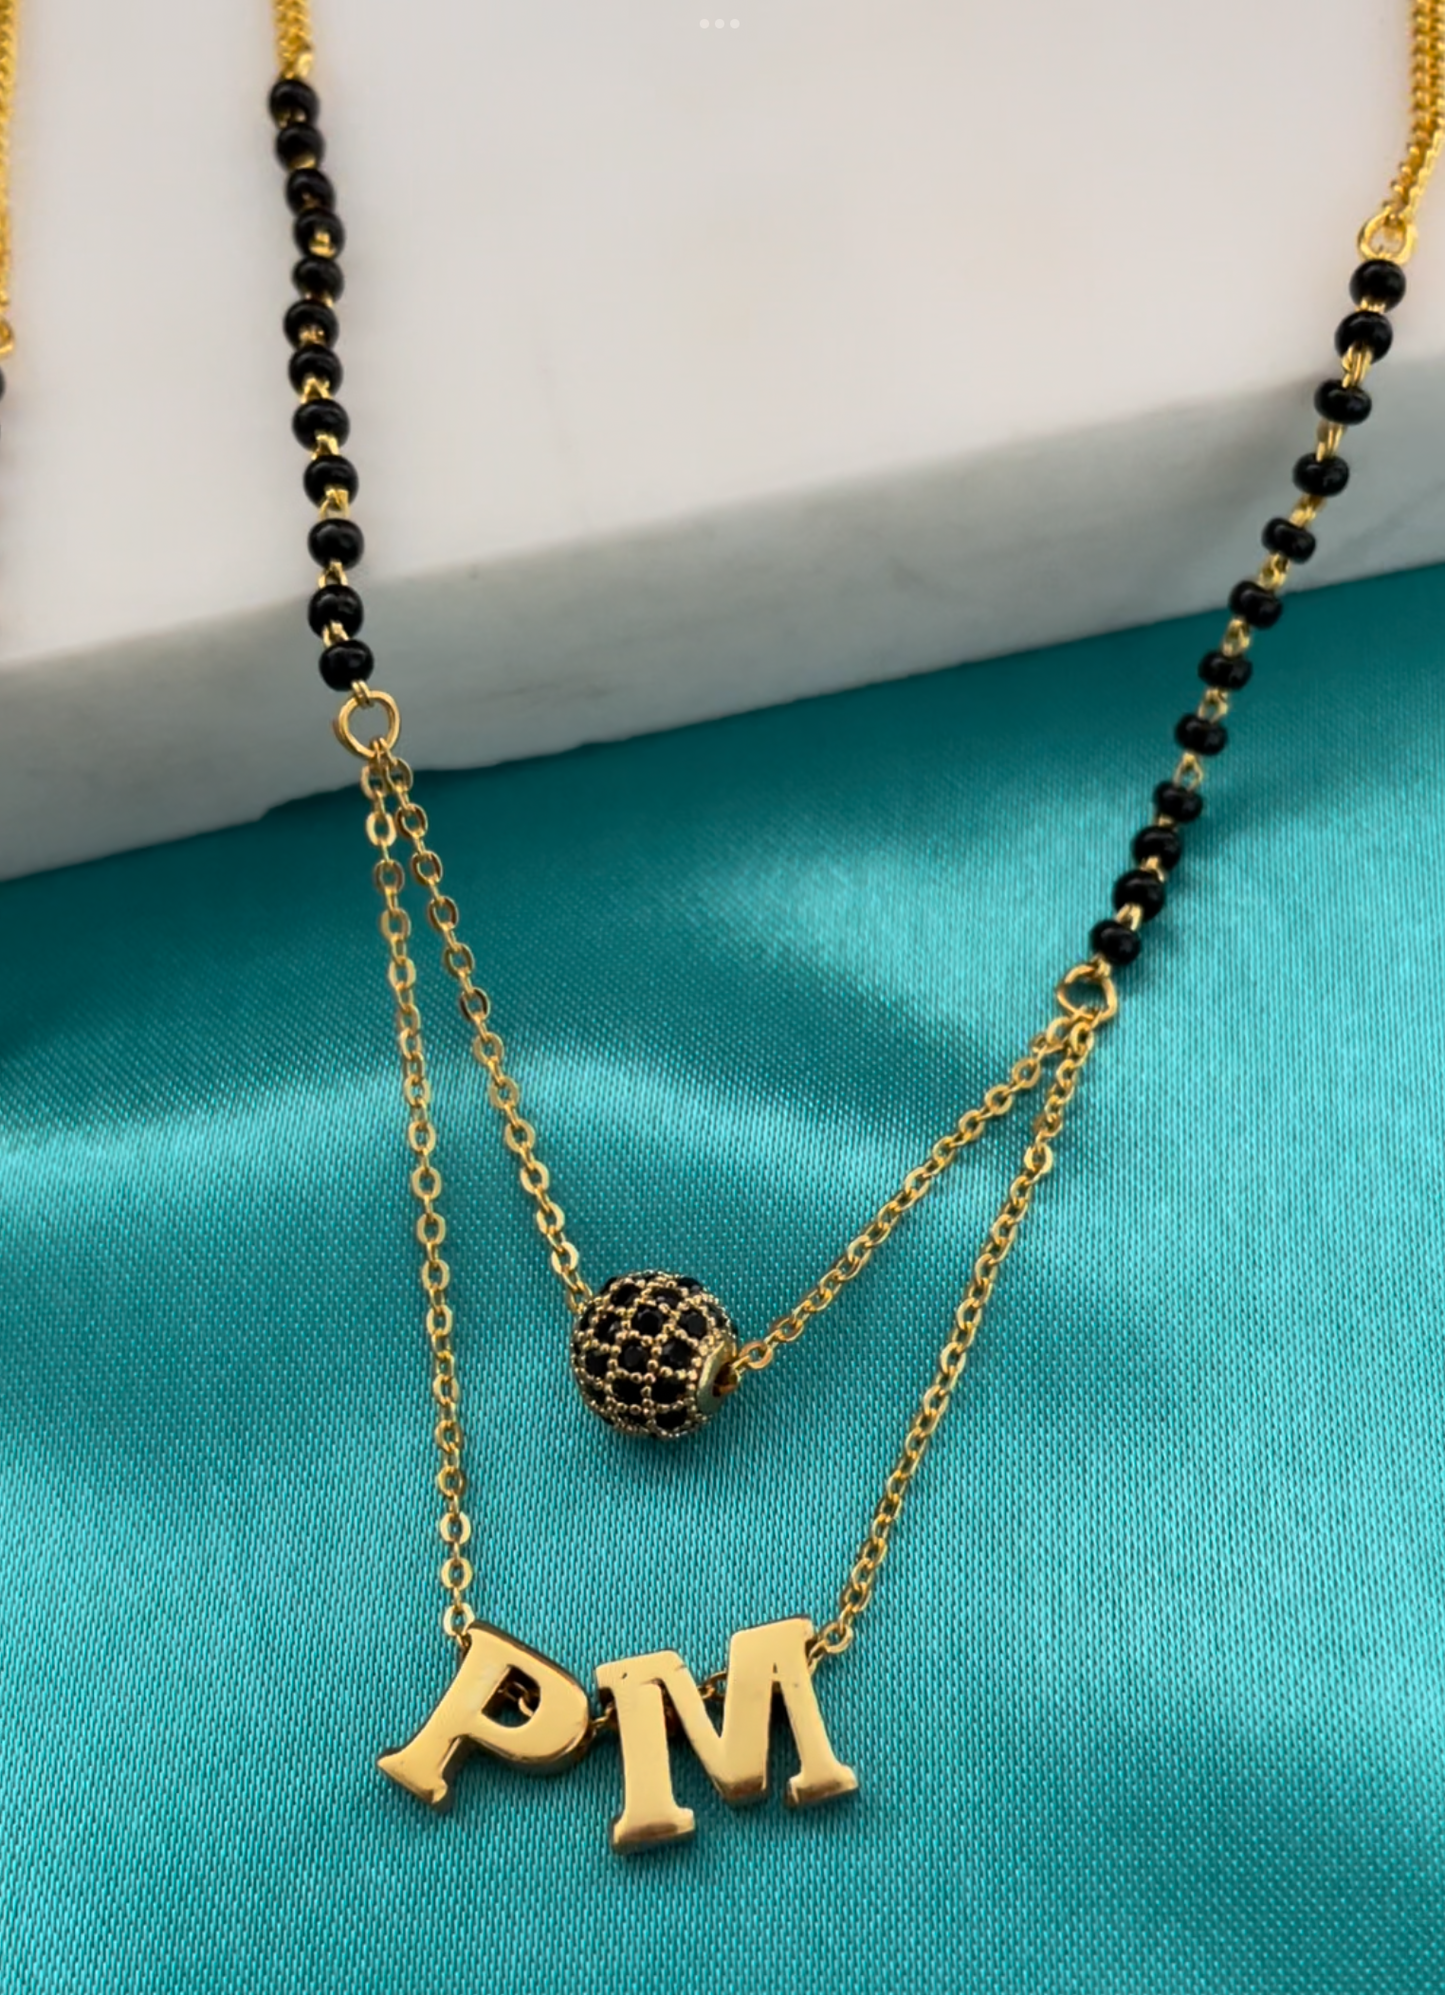 Custom Name Mangalsuta with 2 letters and AD ball